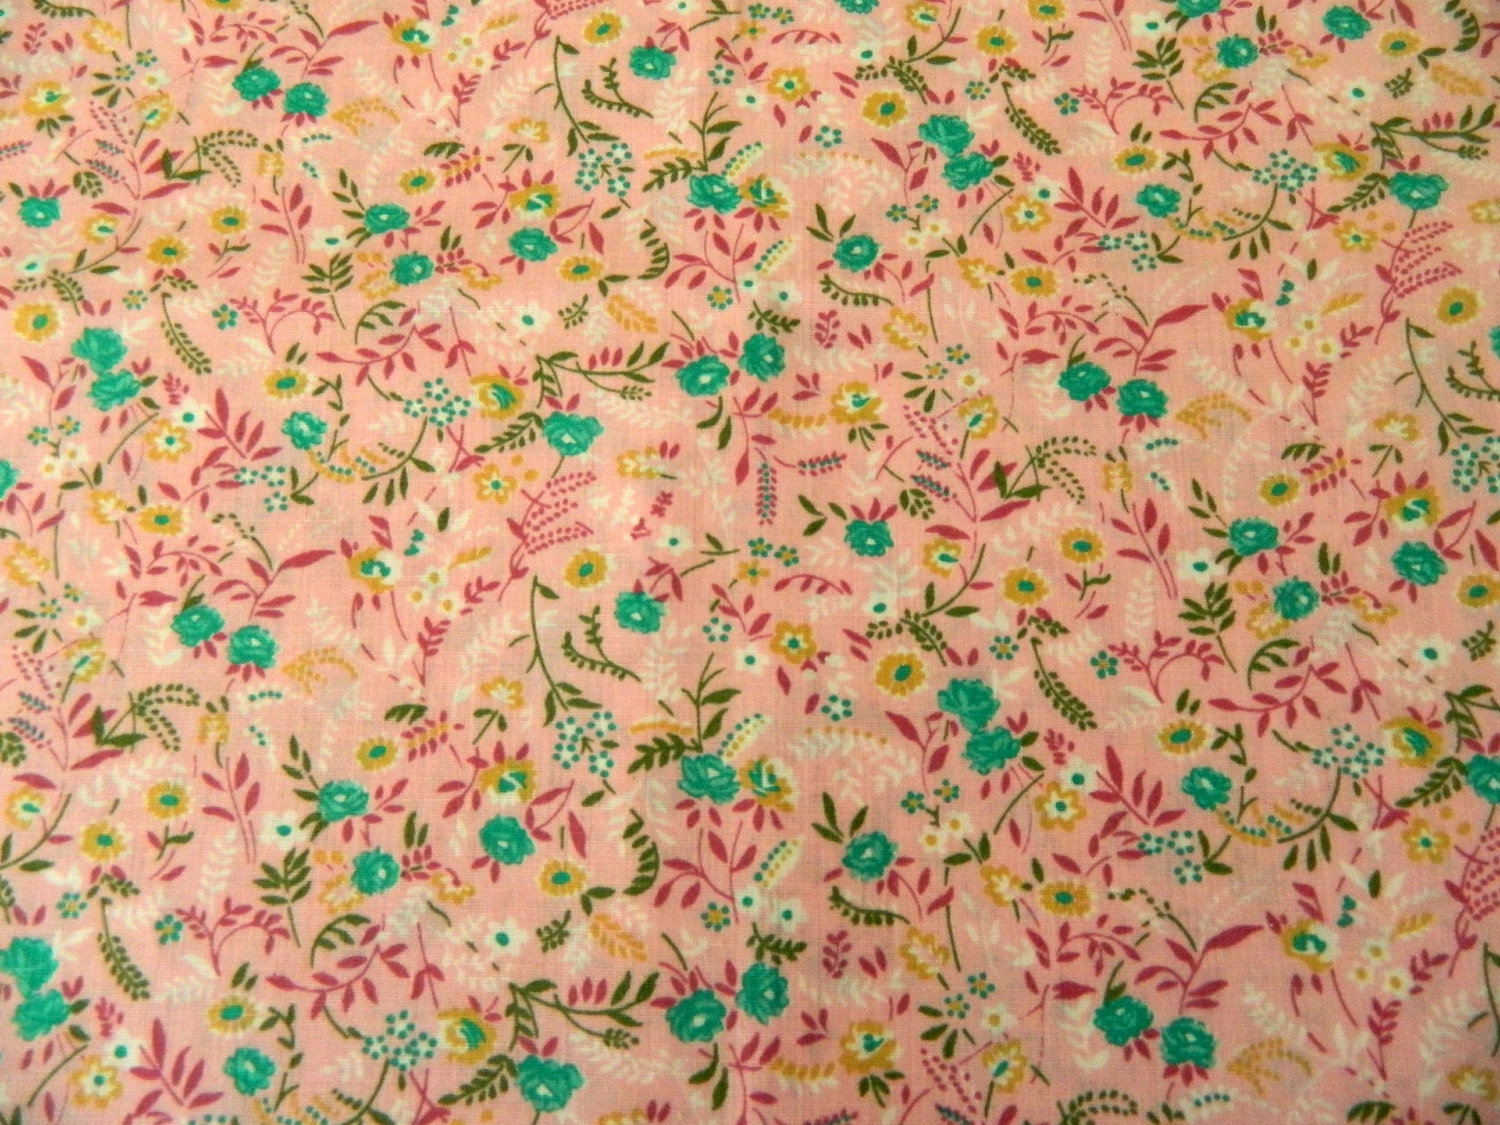 Vintage 70s Small Floral Print Fabric By Theoldbroadscloth